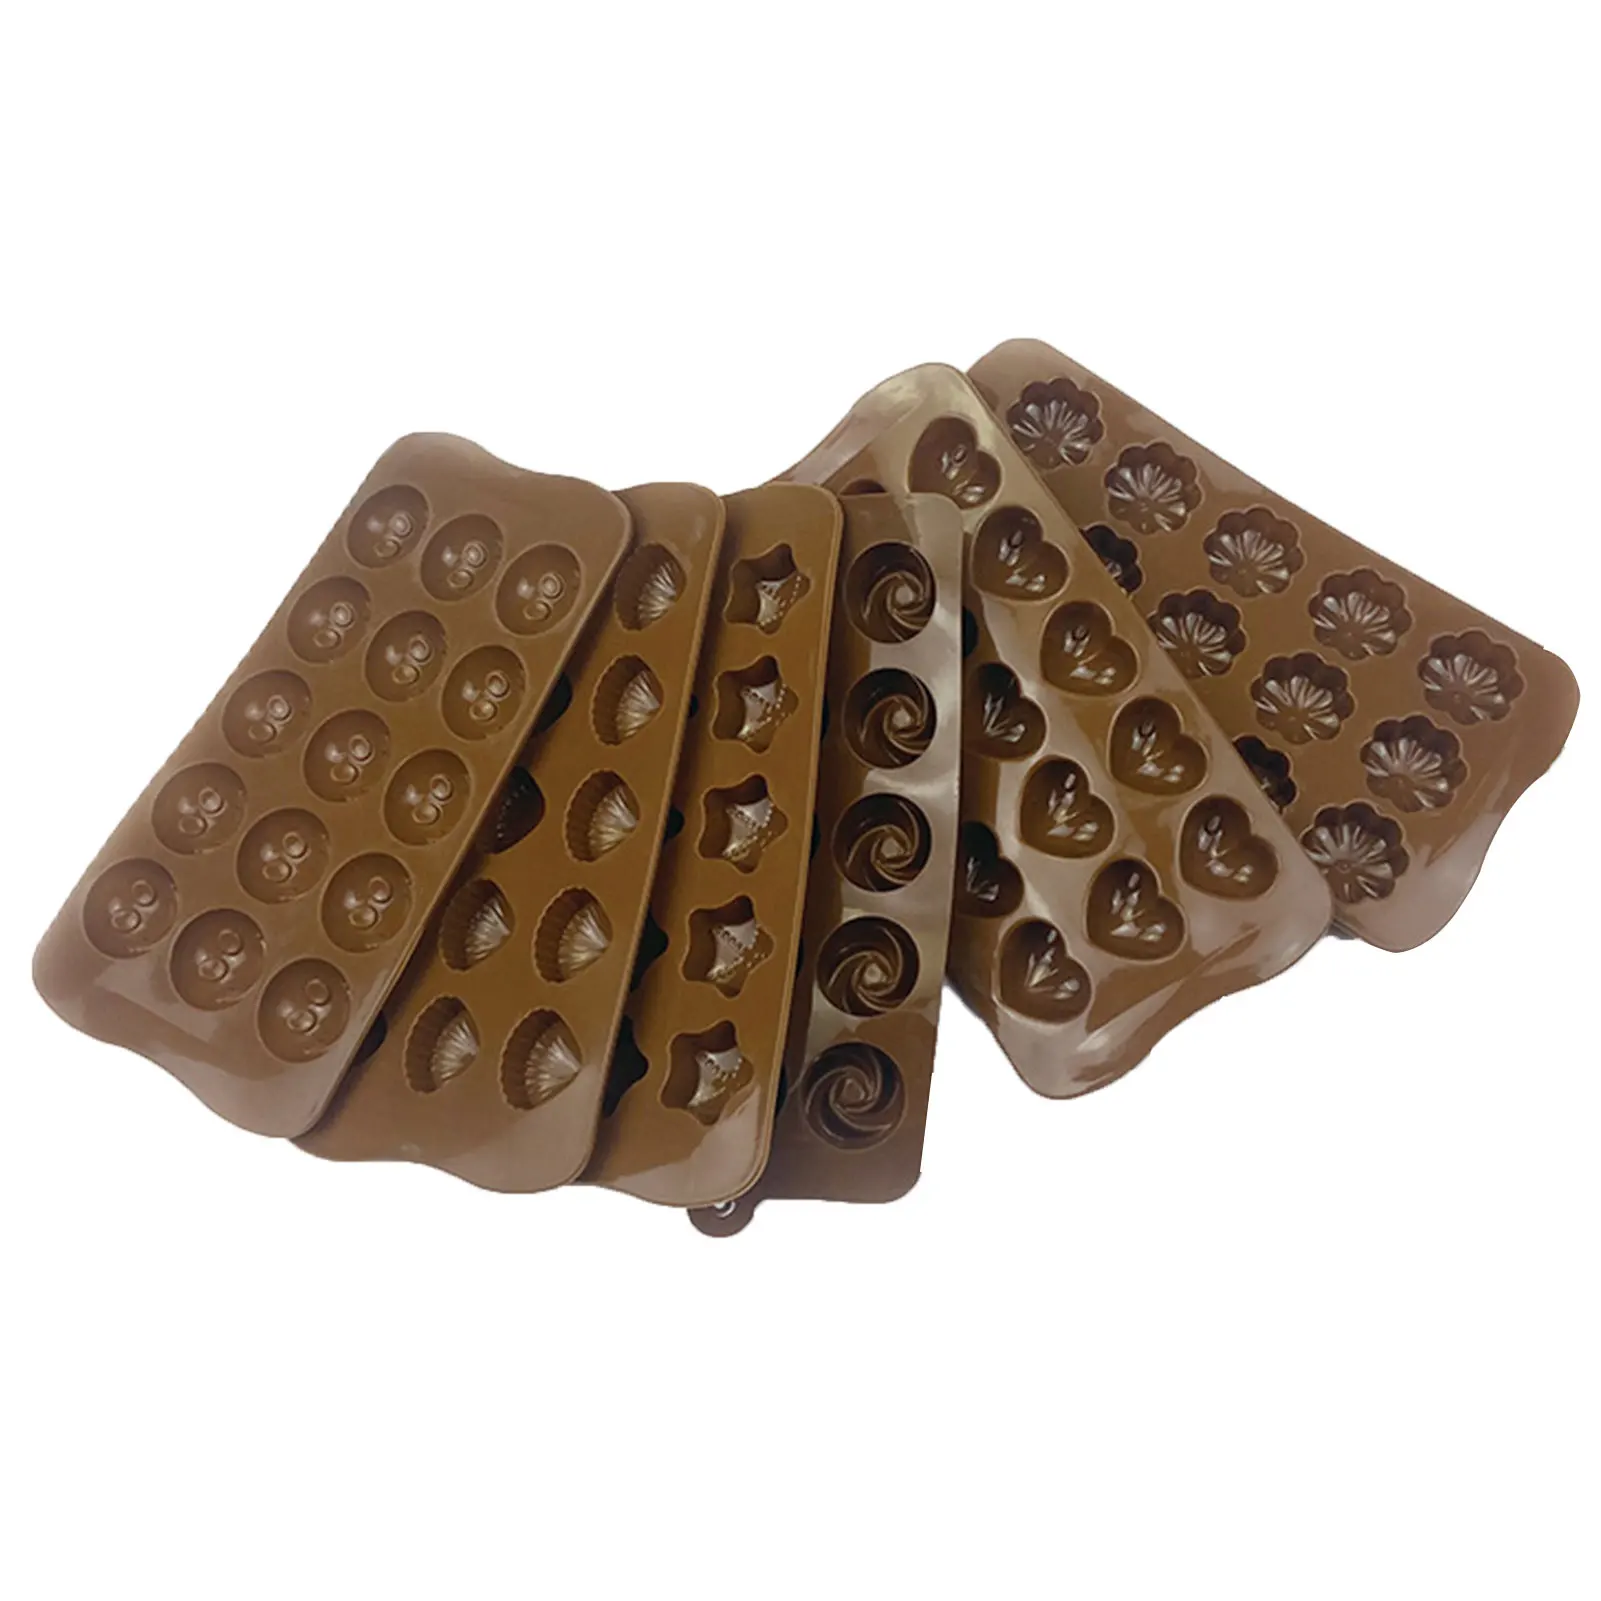 

Silicone Chocolate Mold 3D Shapes Mold Fun Baking Tools For Jelly Candy Heart Shaped Gummy Cake Kitchen Gadgets DIY Homemade